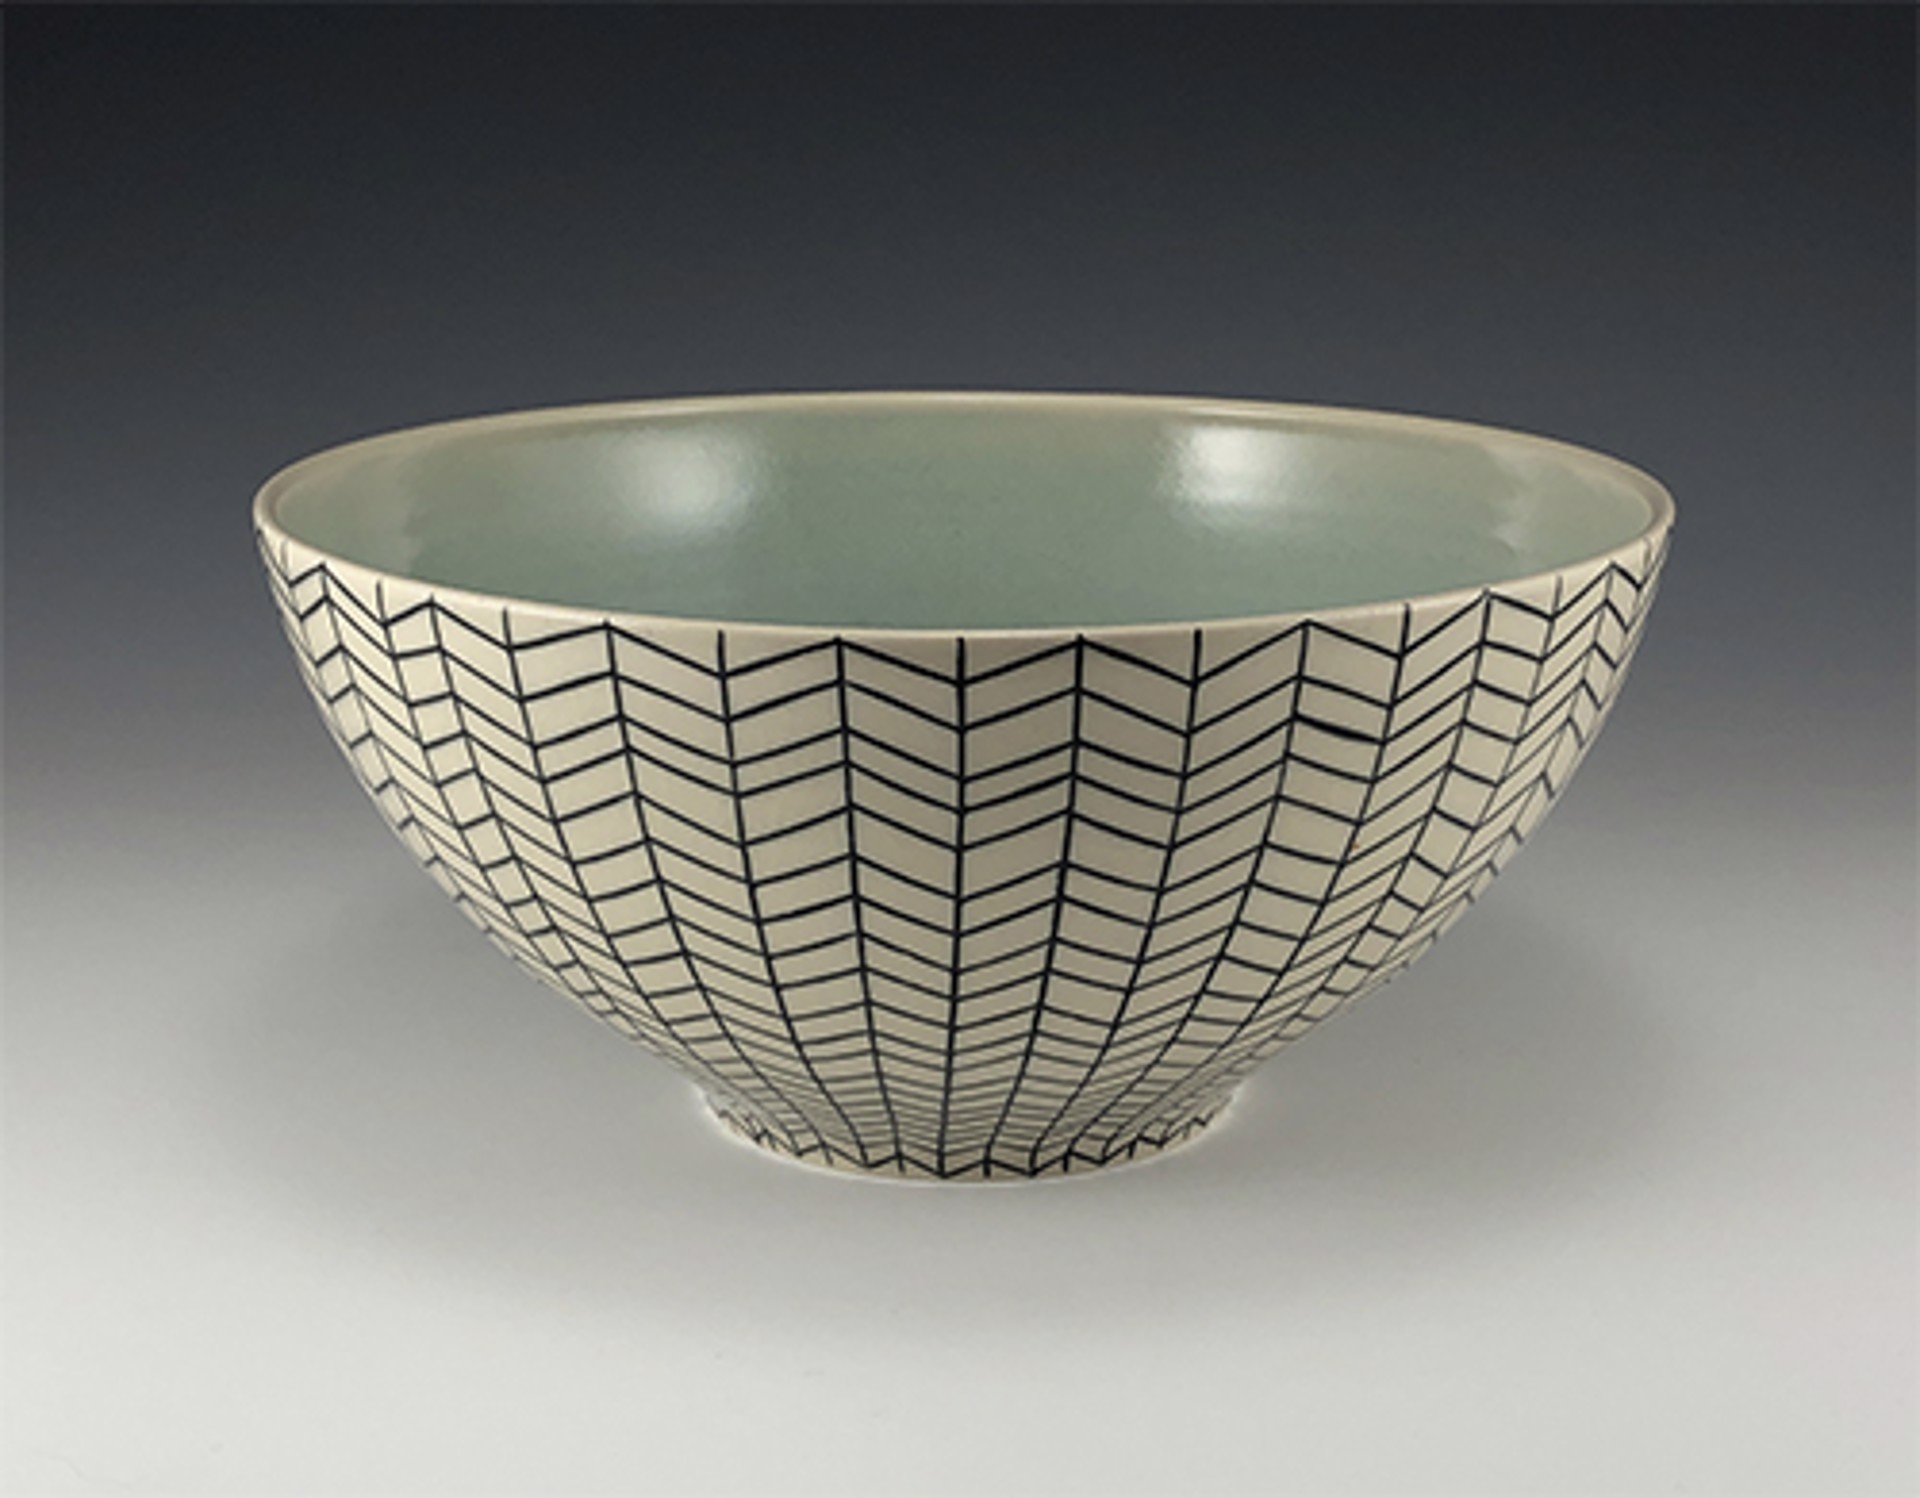 Bowl by Amy Nelson